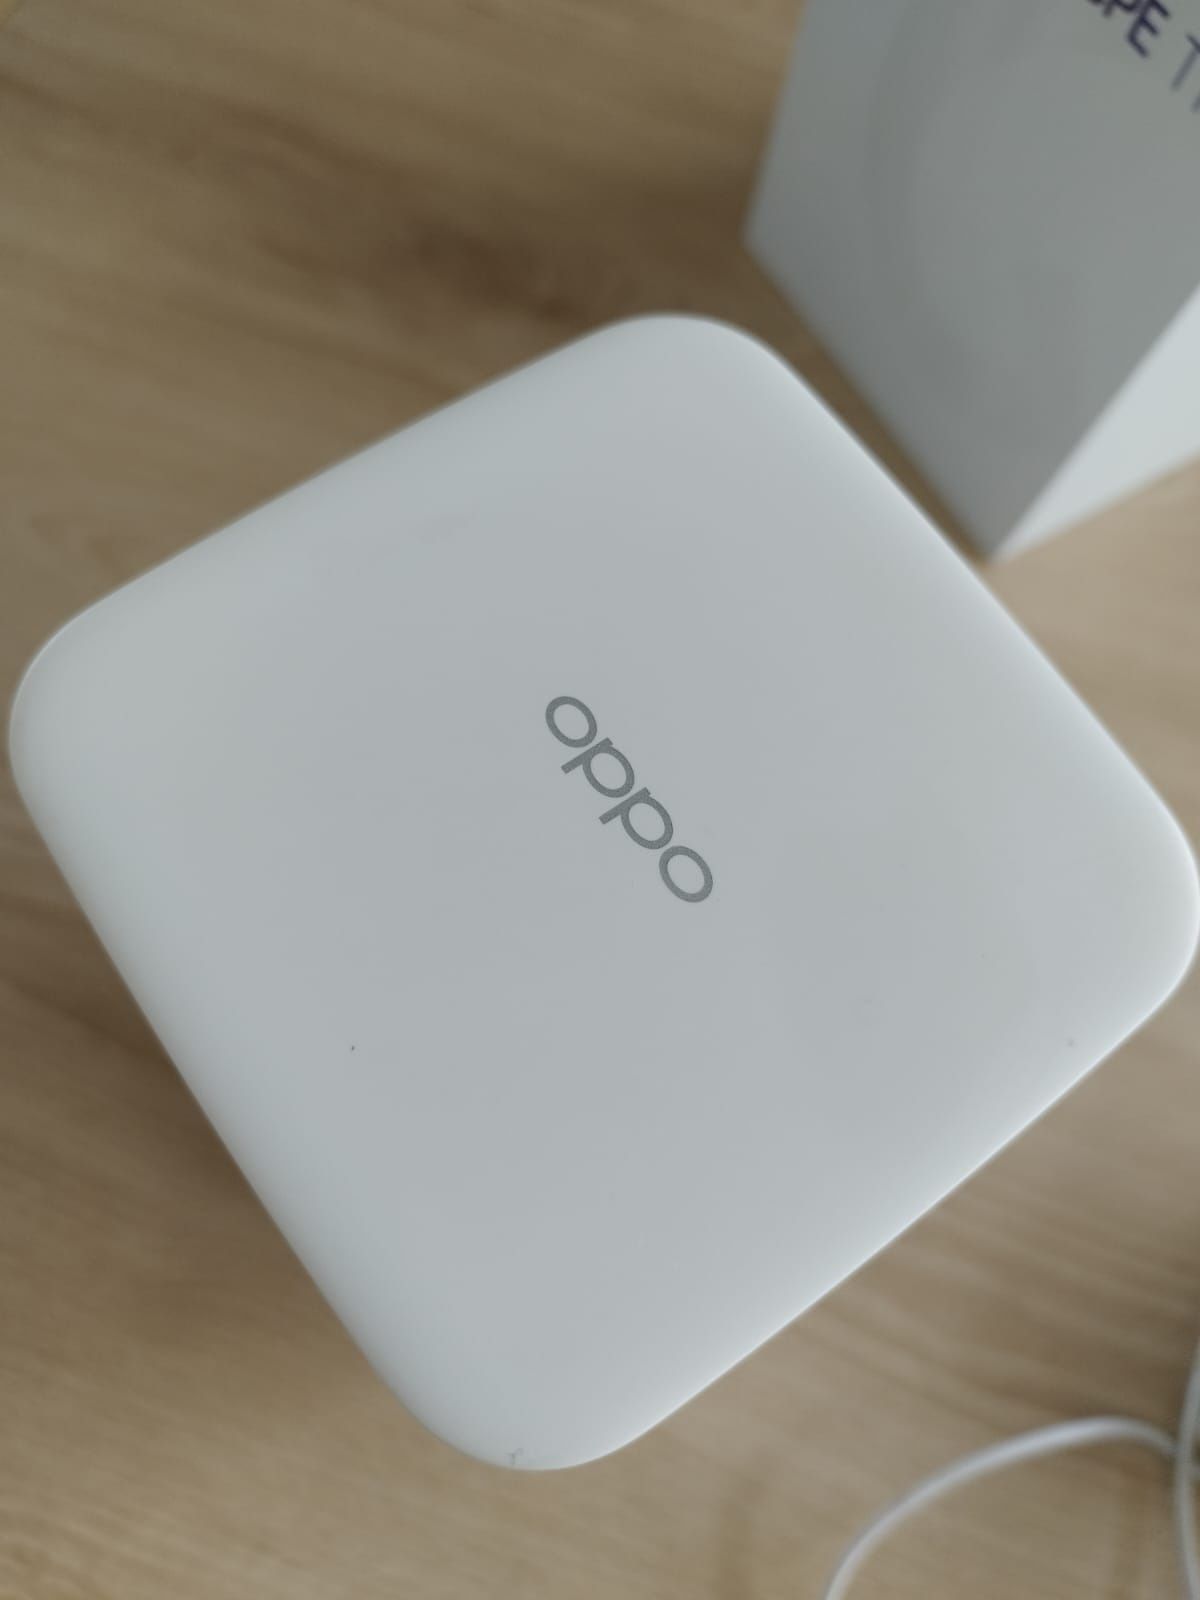 Router 5G/LTE OPPO cpe t1a